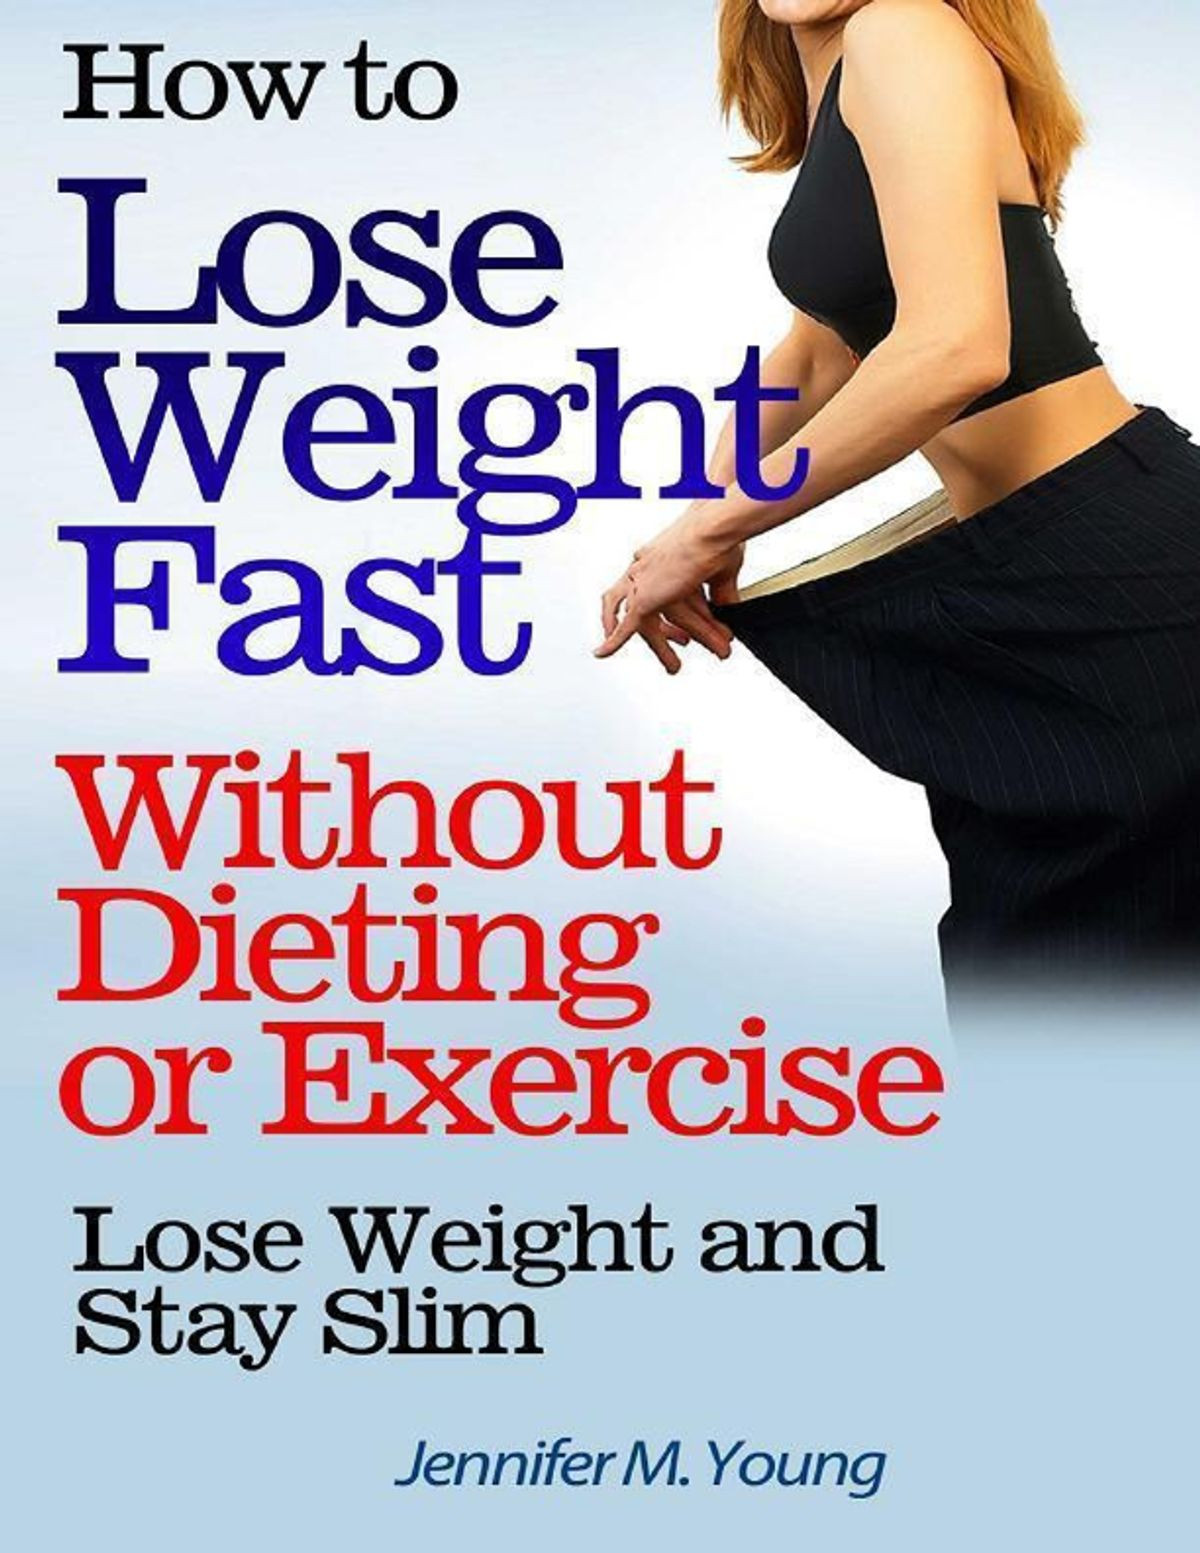 How To Lose Weight
 How to Lose Weight Fast Without Dieting or Exercise Lose